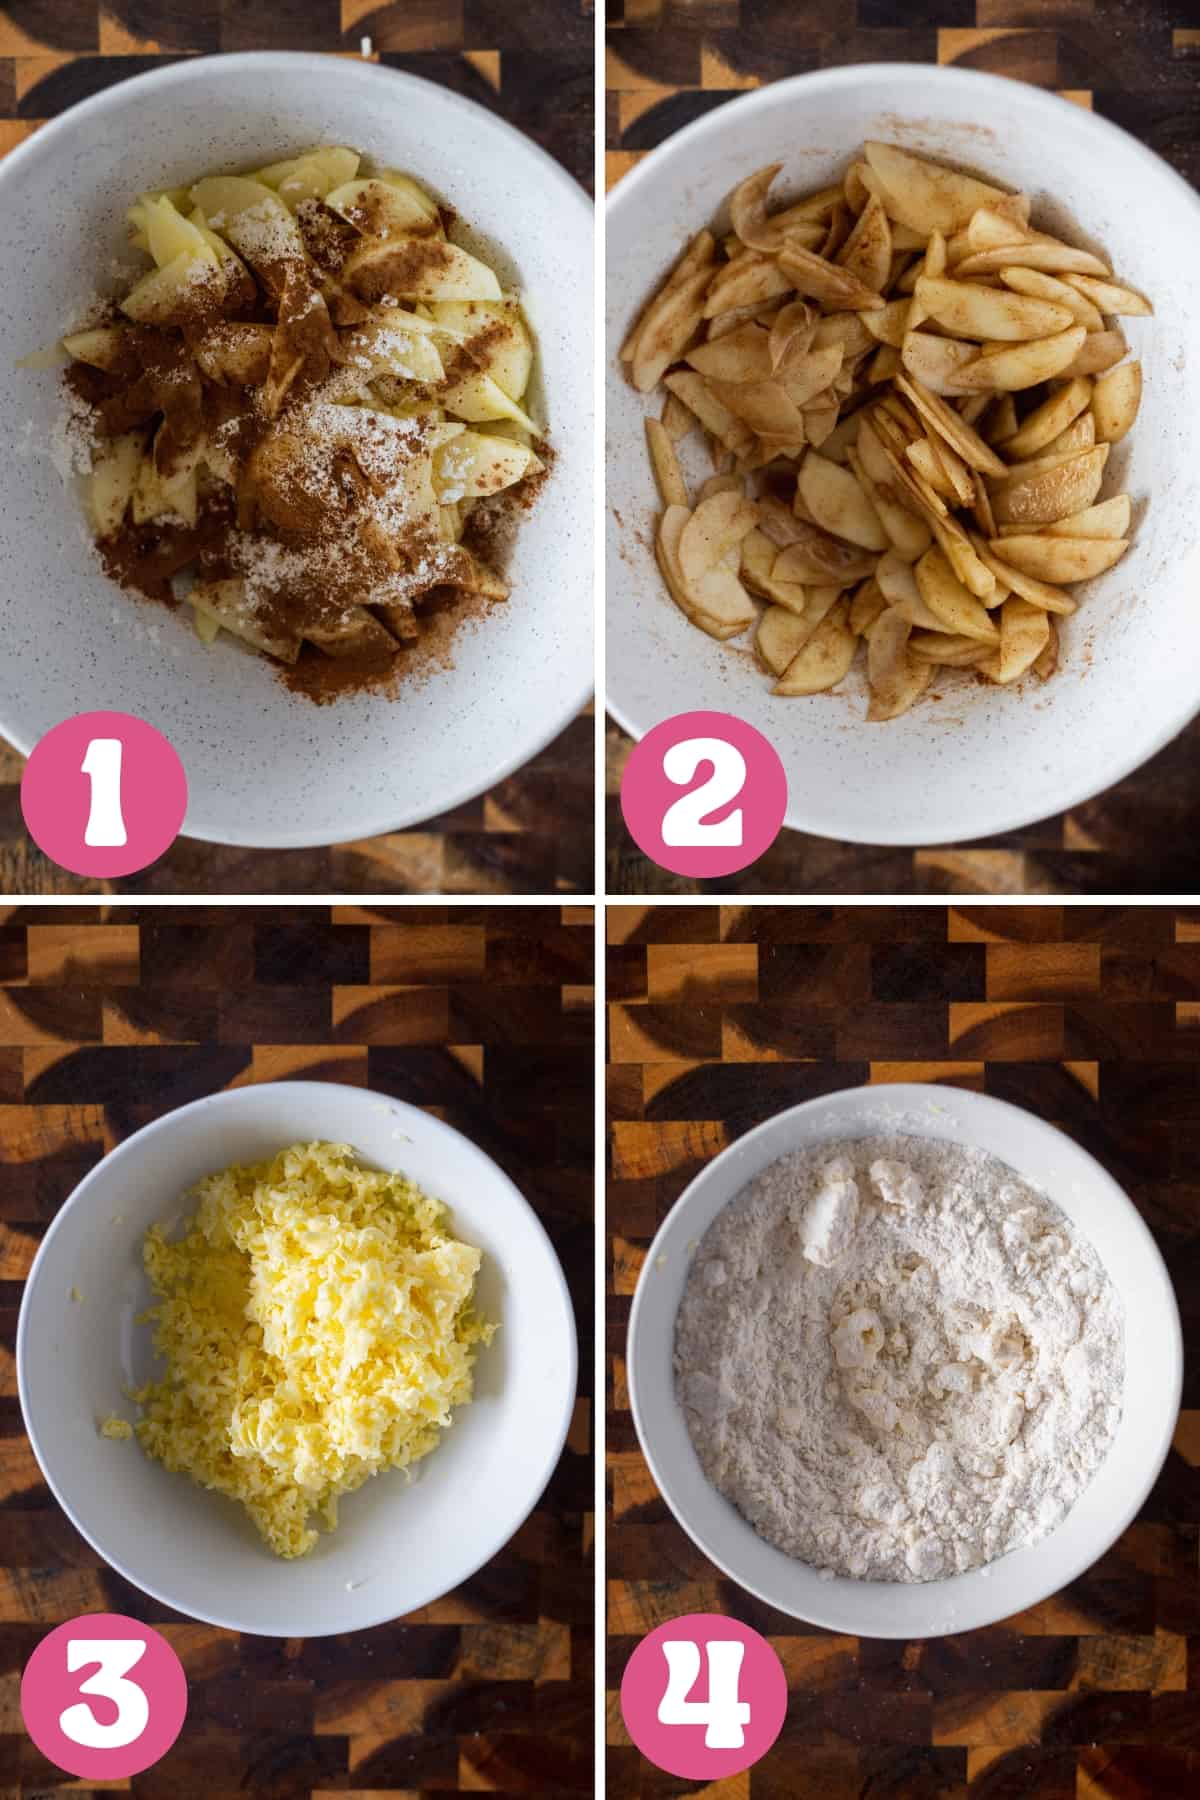 Four images showing how to make an apple crumb tart steps one through four